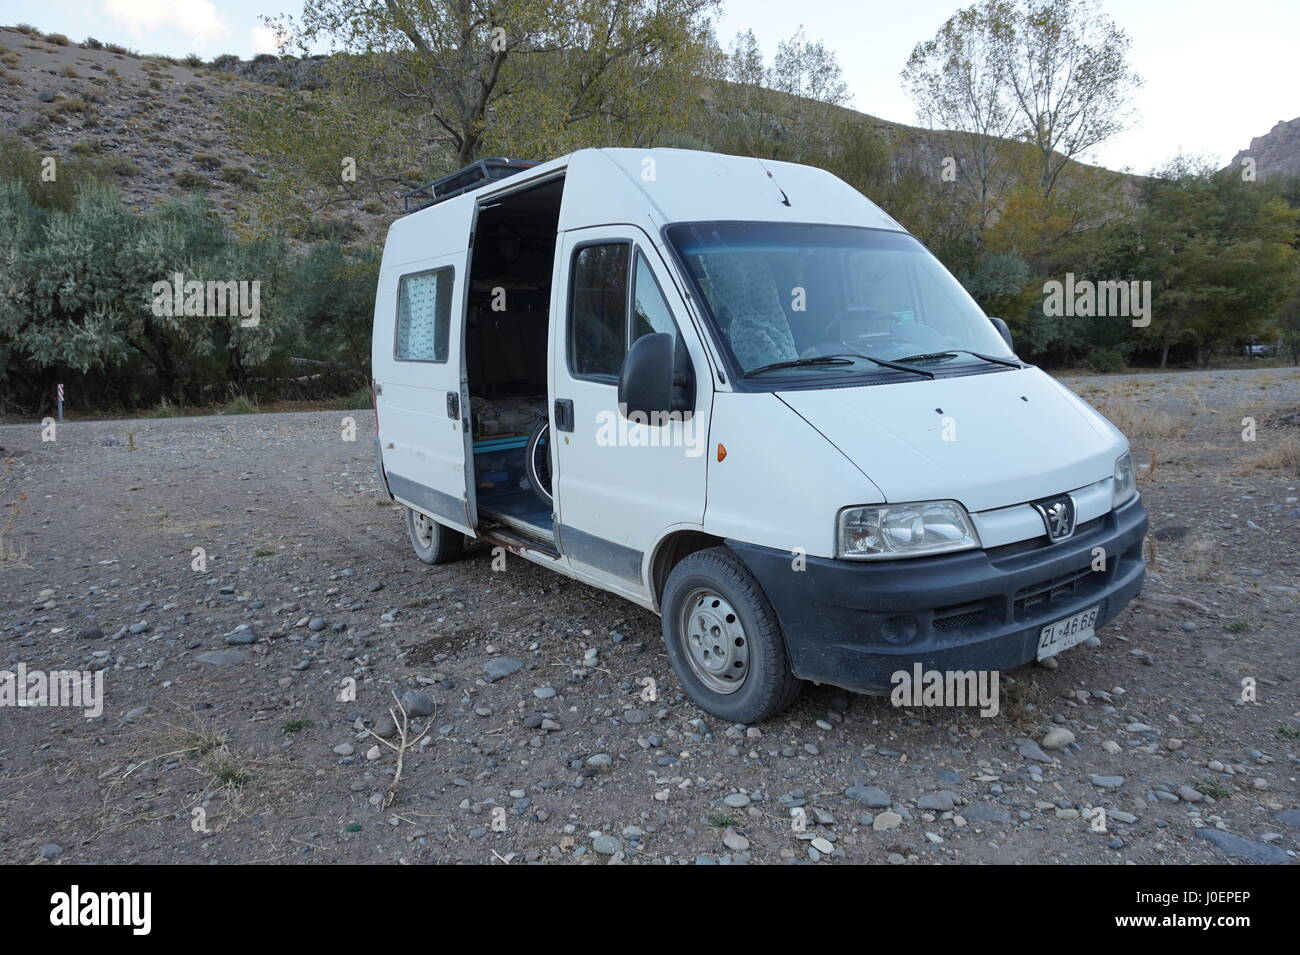 Peugeot Boxer High Resolution Stock Photography And Images - Alamy